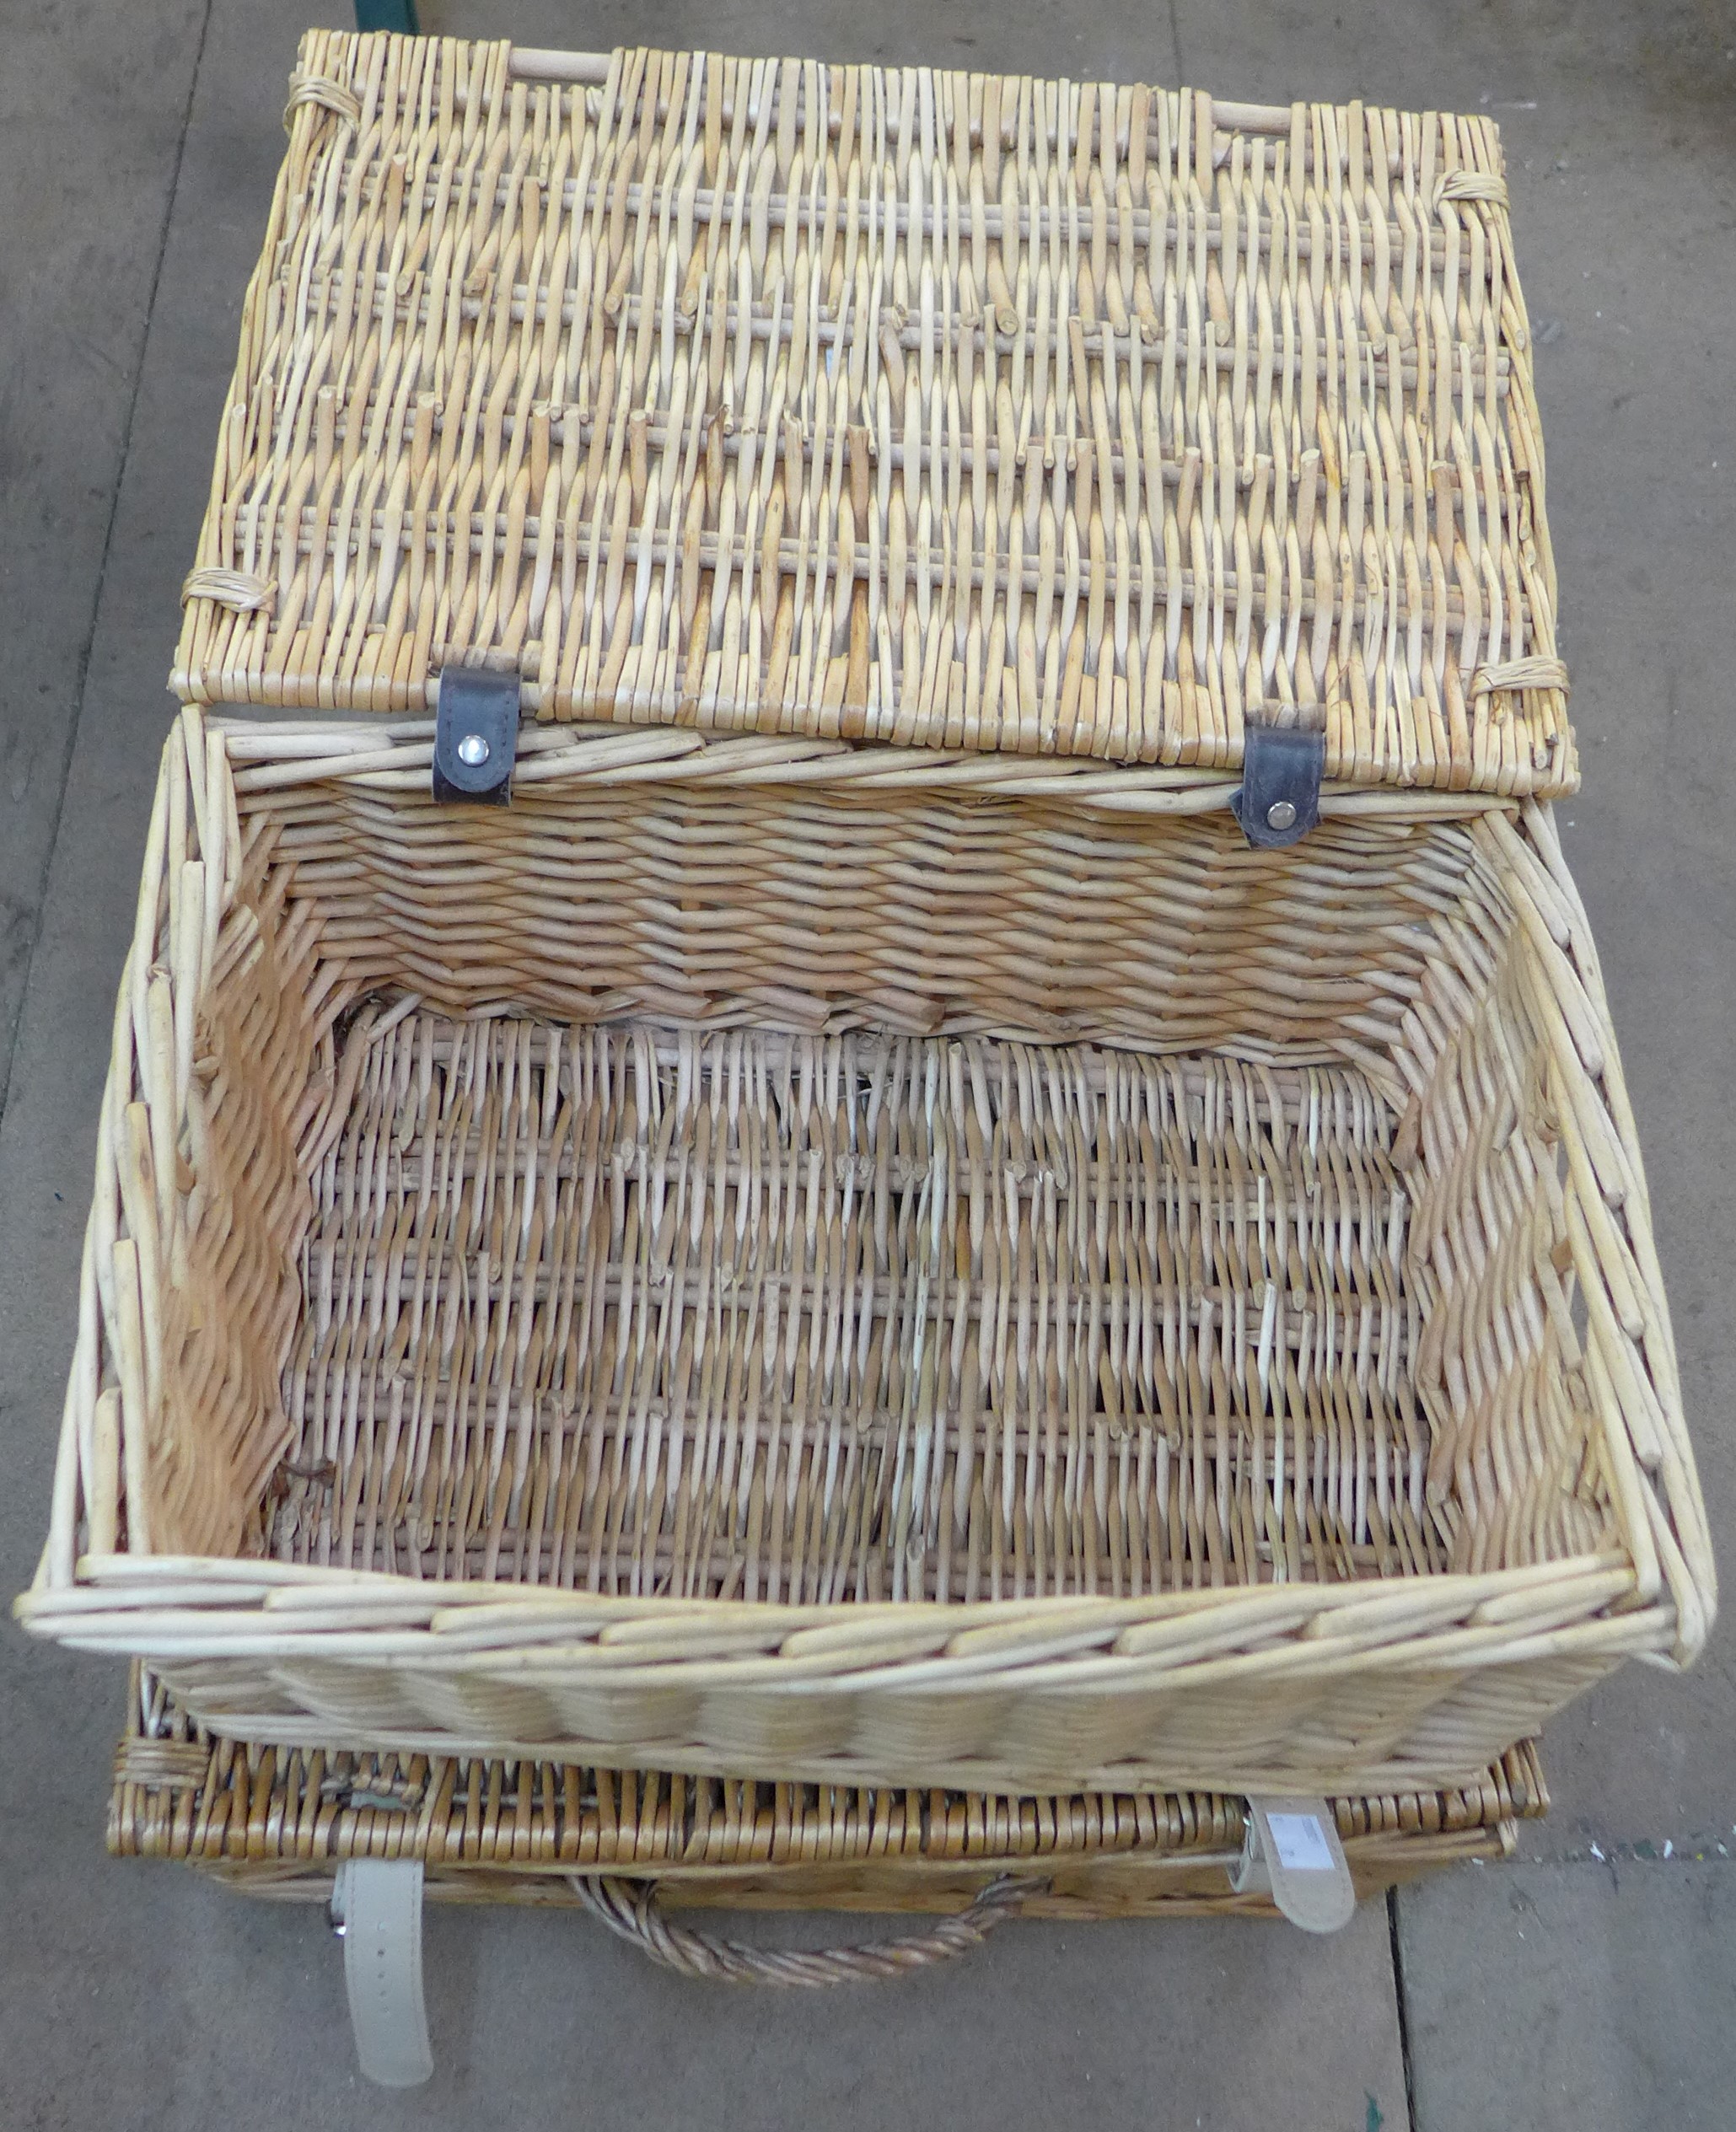 Two wicker picnic baskets - Image 2 of 3